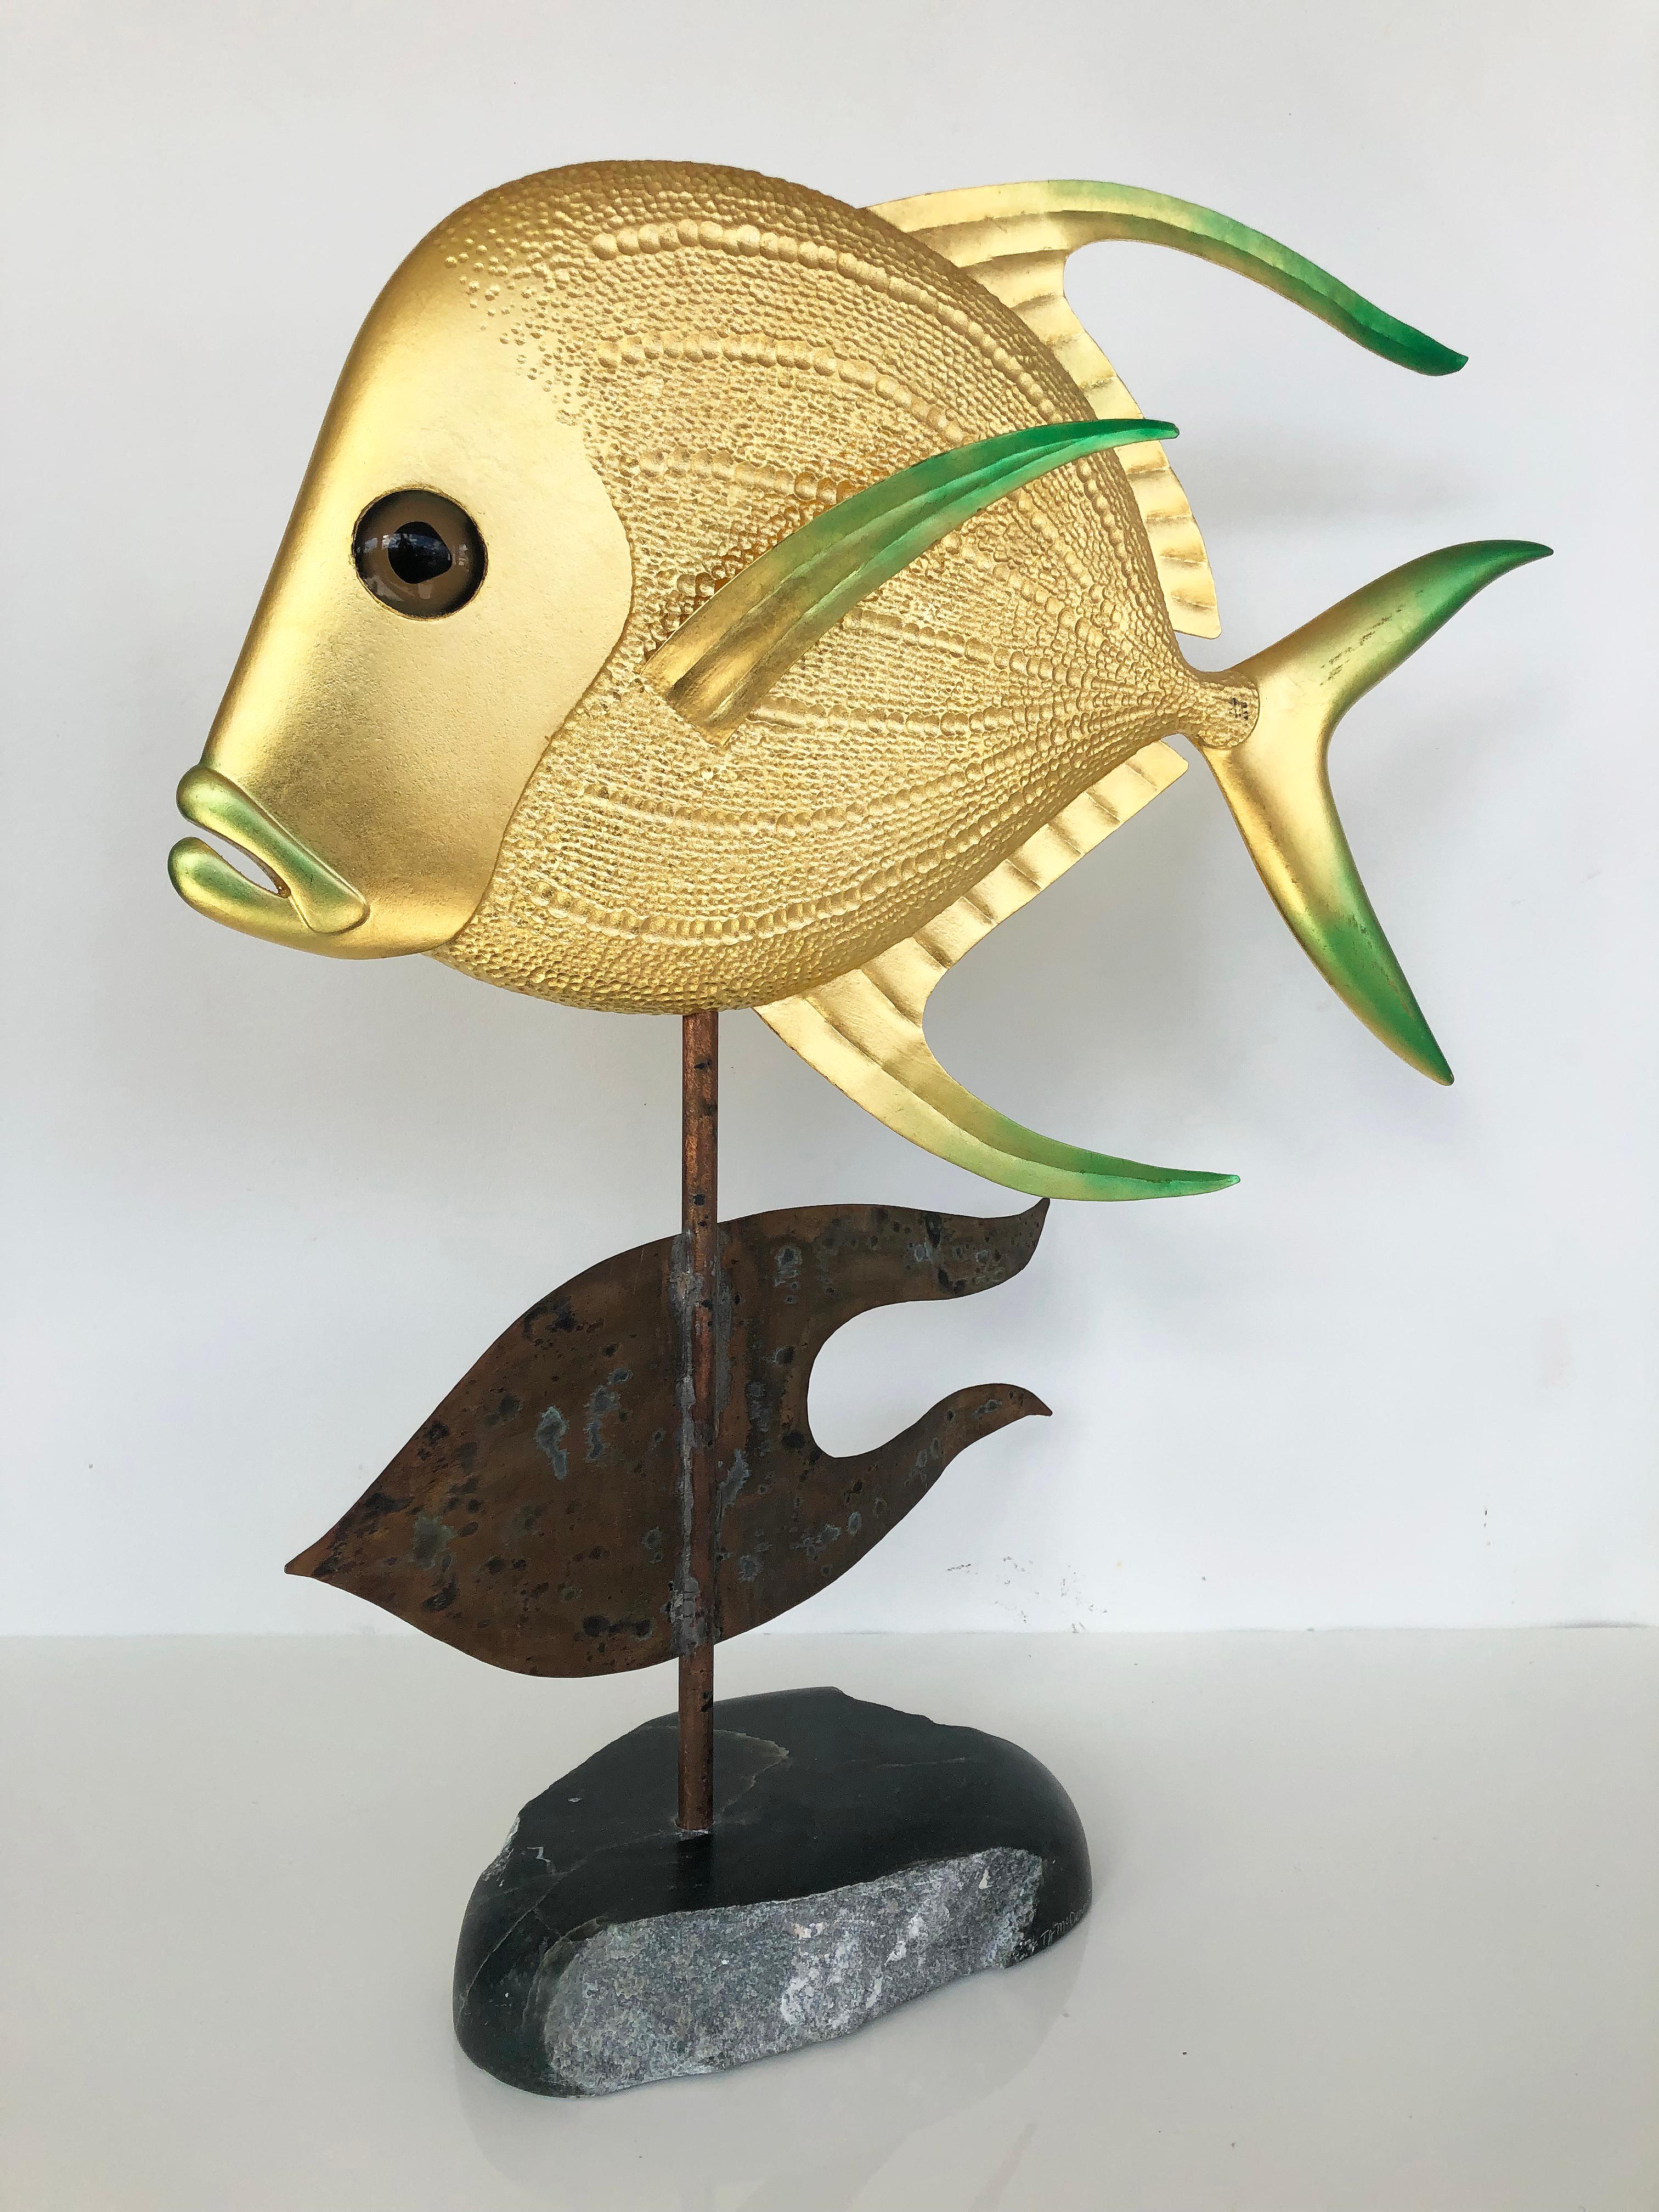 TJ McDermott (Freeport, ME) Brass, Metal & Marble Fish Sculpture on Stand

Offered for sale is a TJ McDermott signed fish sculpture on stand made using brass and metal and standing on a marble base. The artist works in Freeport and Portland, Maine